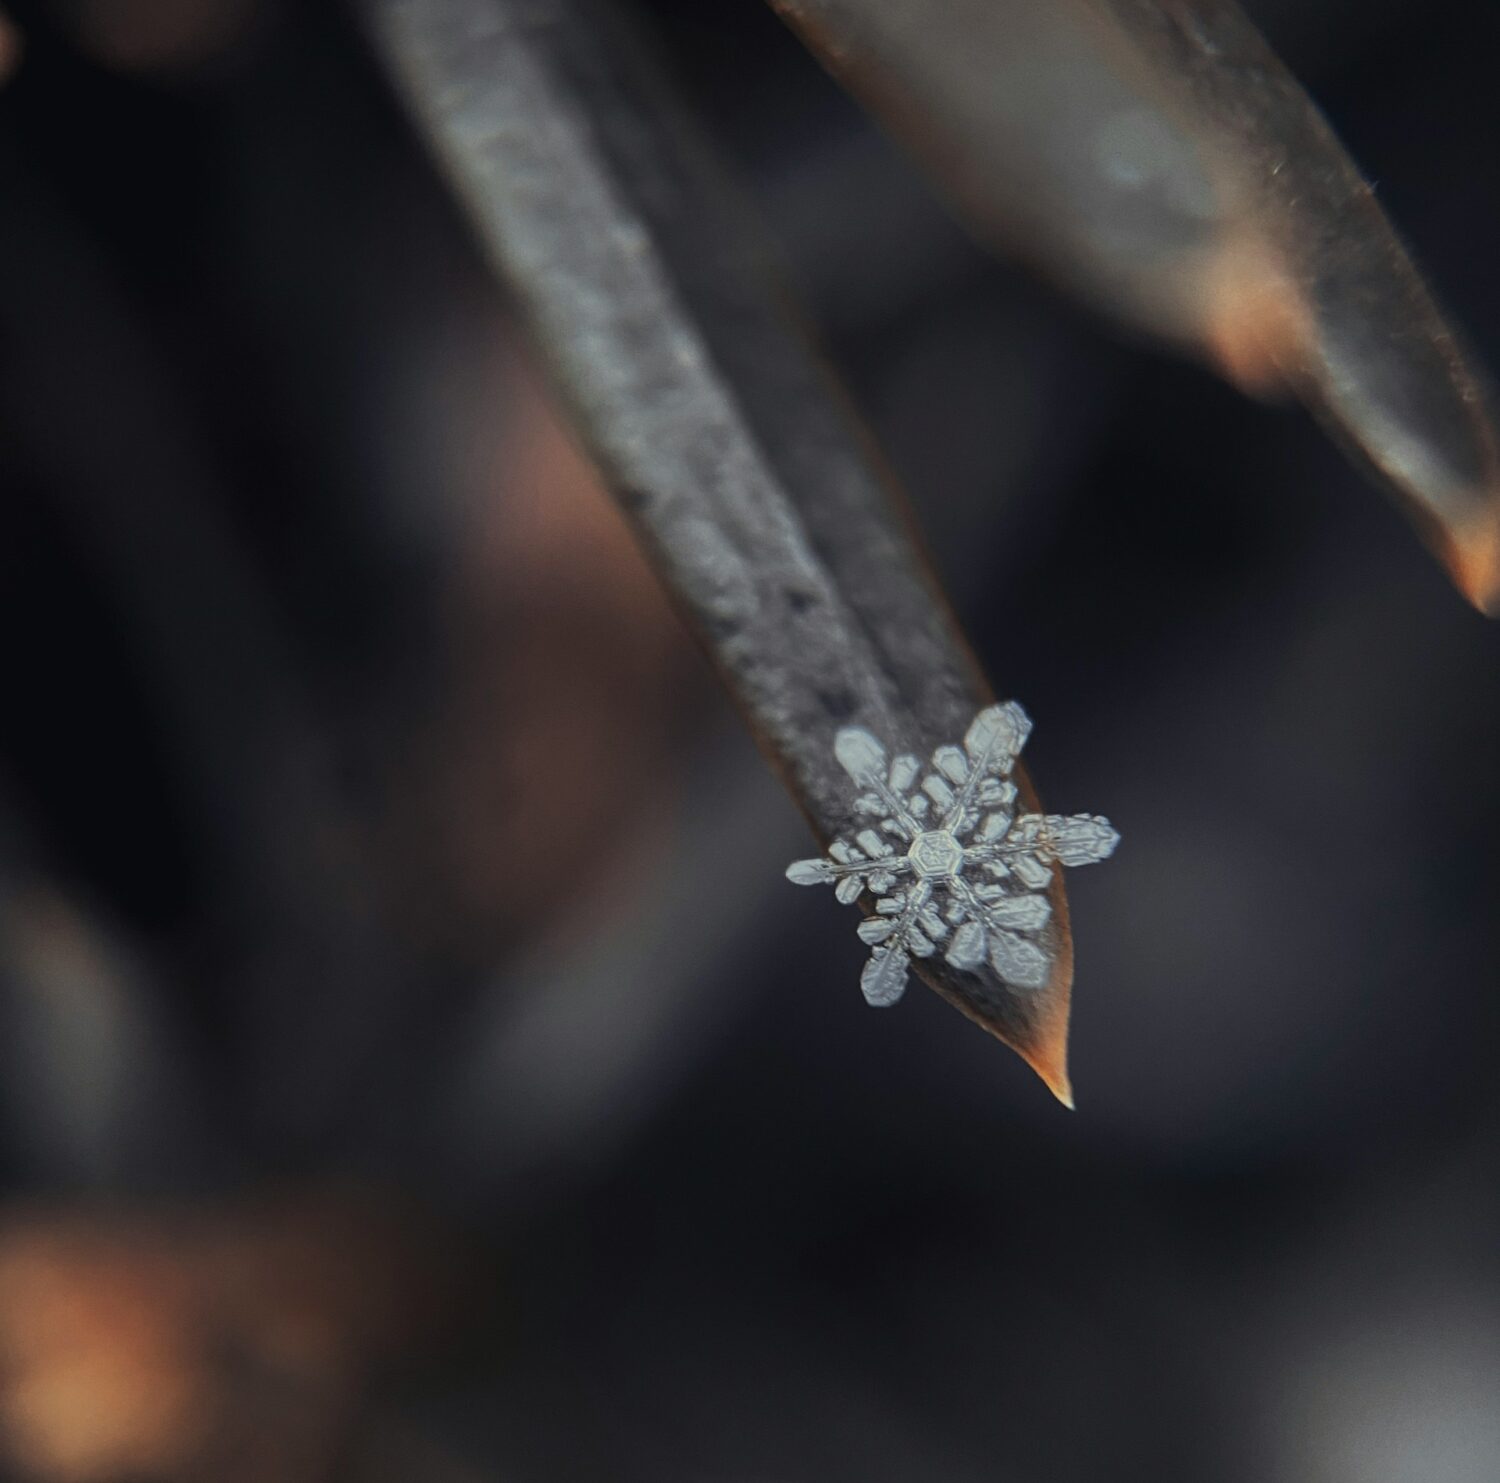 A snowflake on the end of a leaf